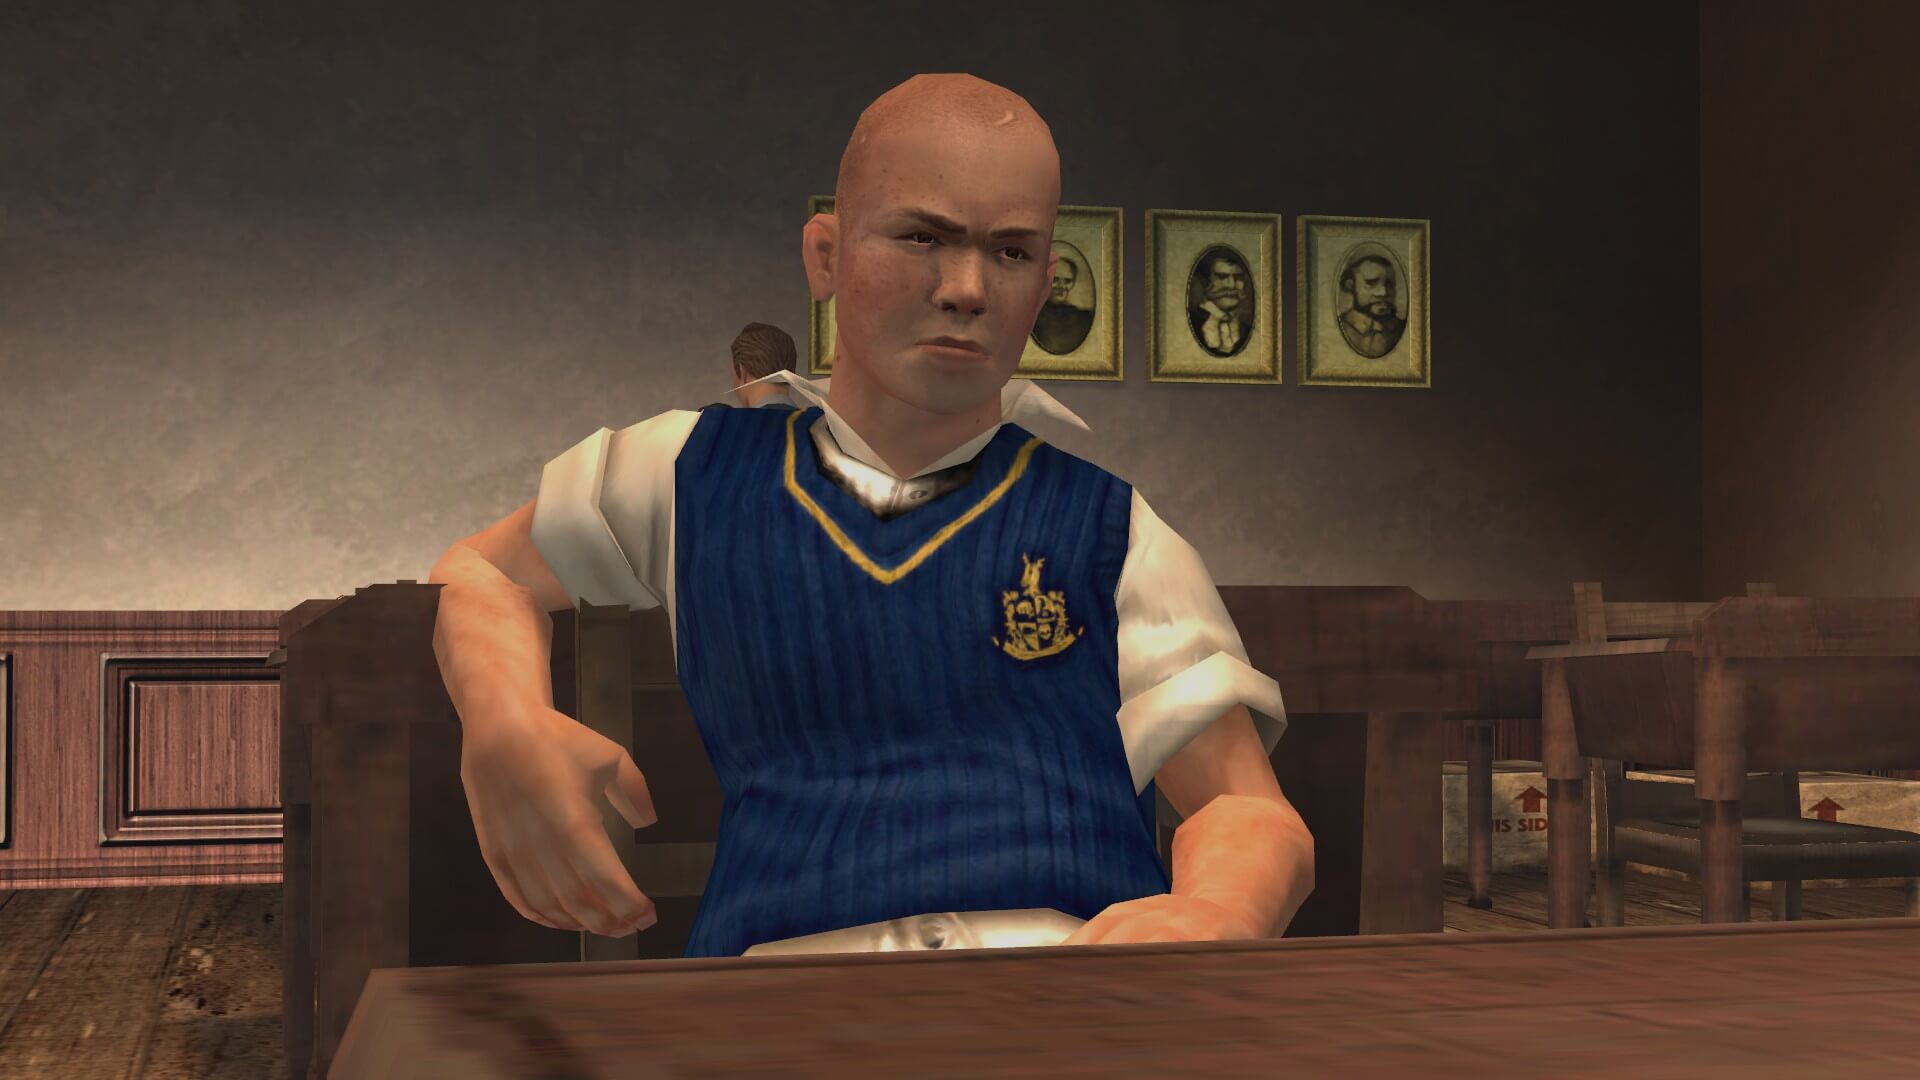 Bully: Anniversary Edition has released on smartphones - Bully